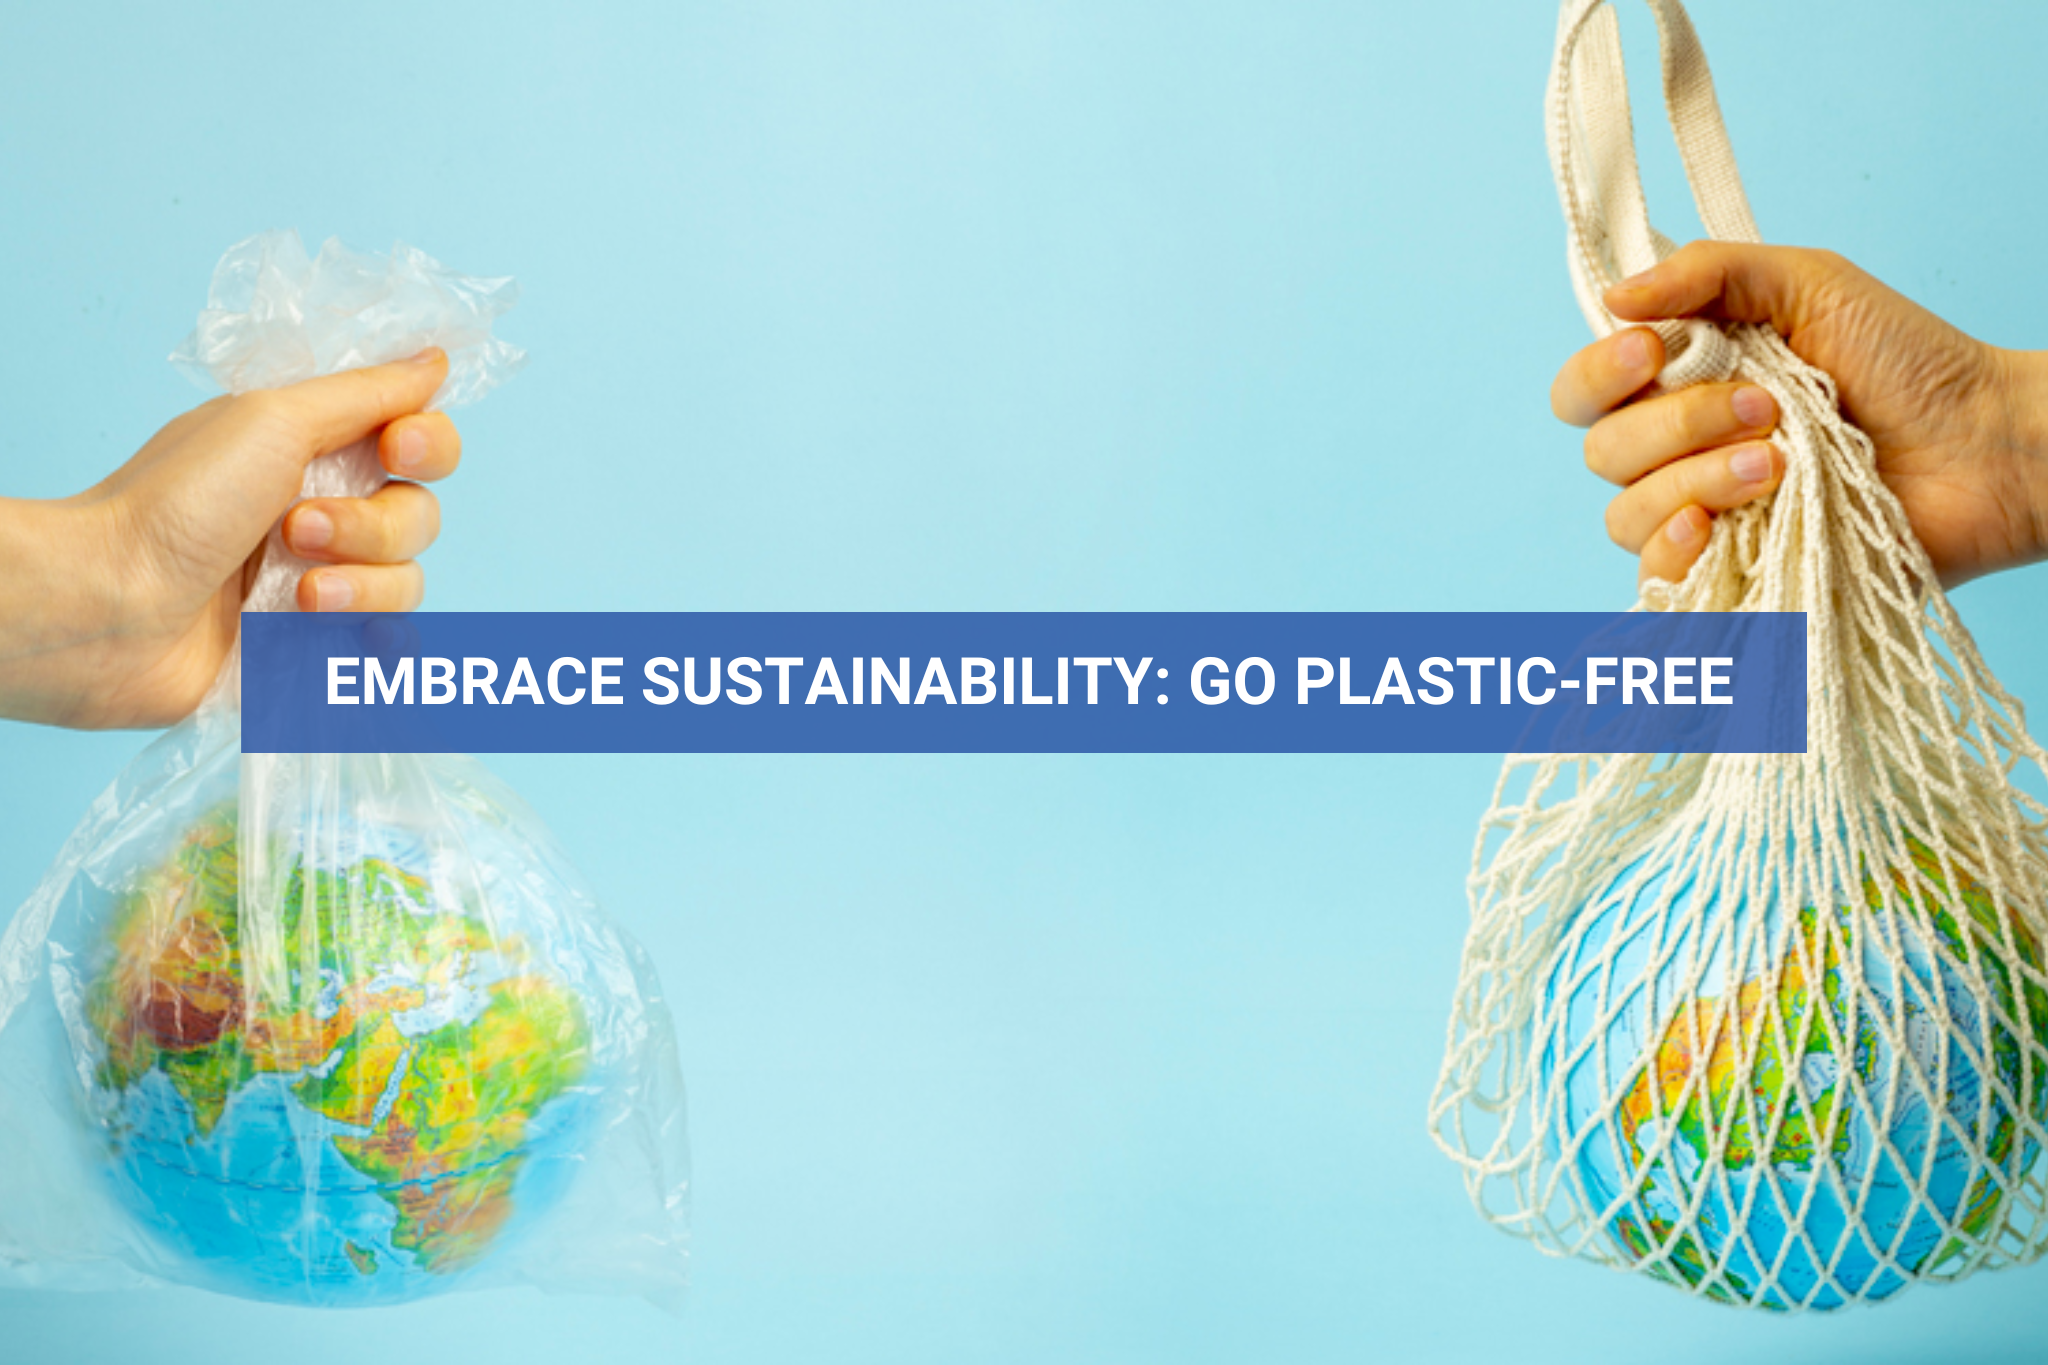 Embrace Sustainability: Challenge Yourself to Go Plastic-Free